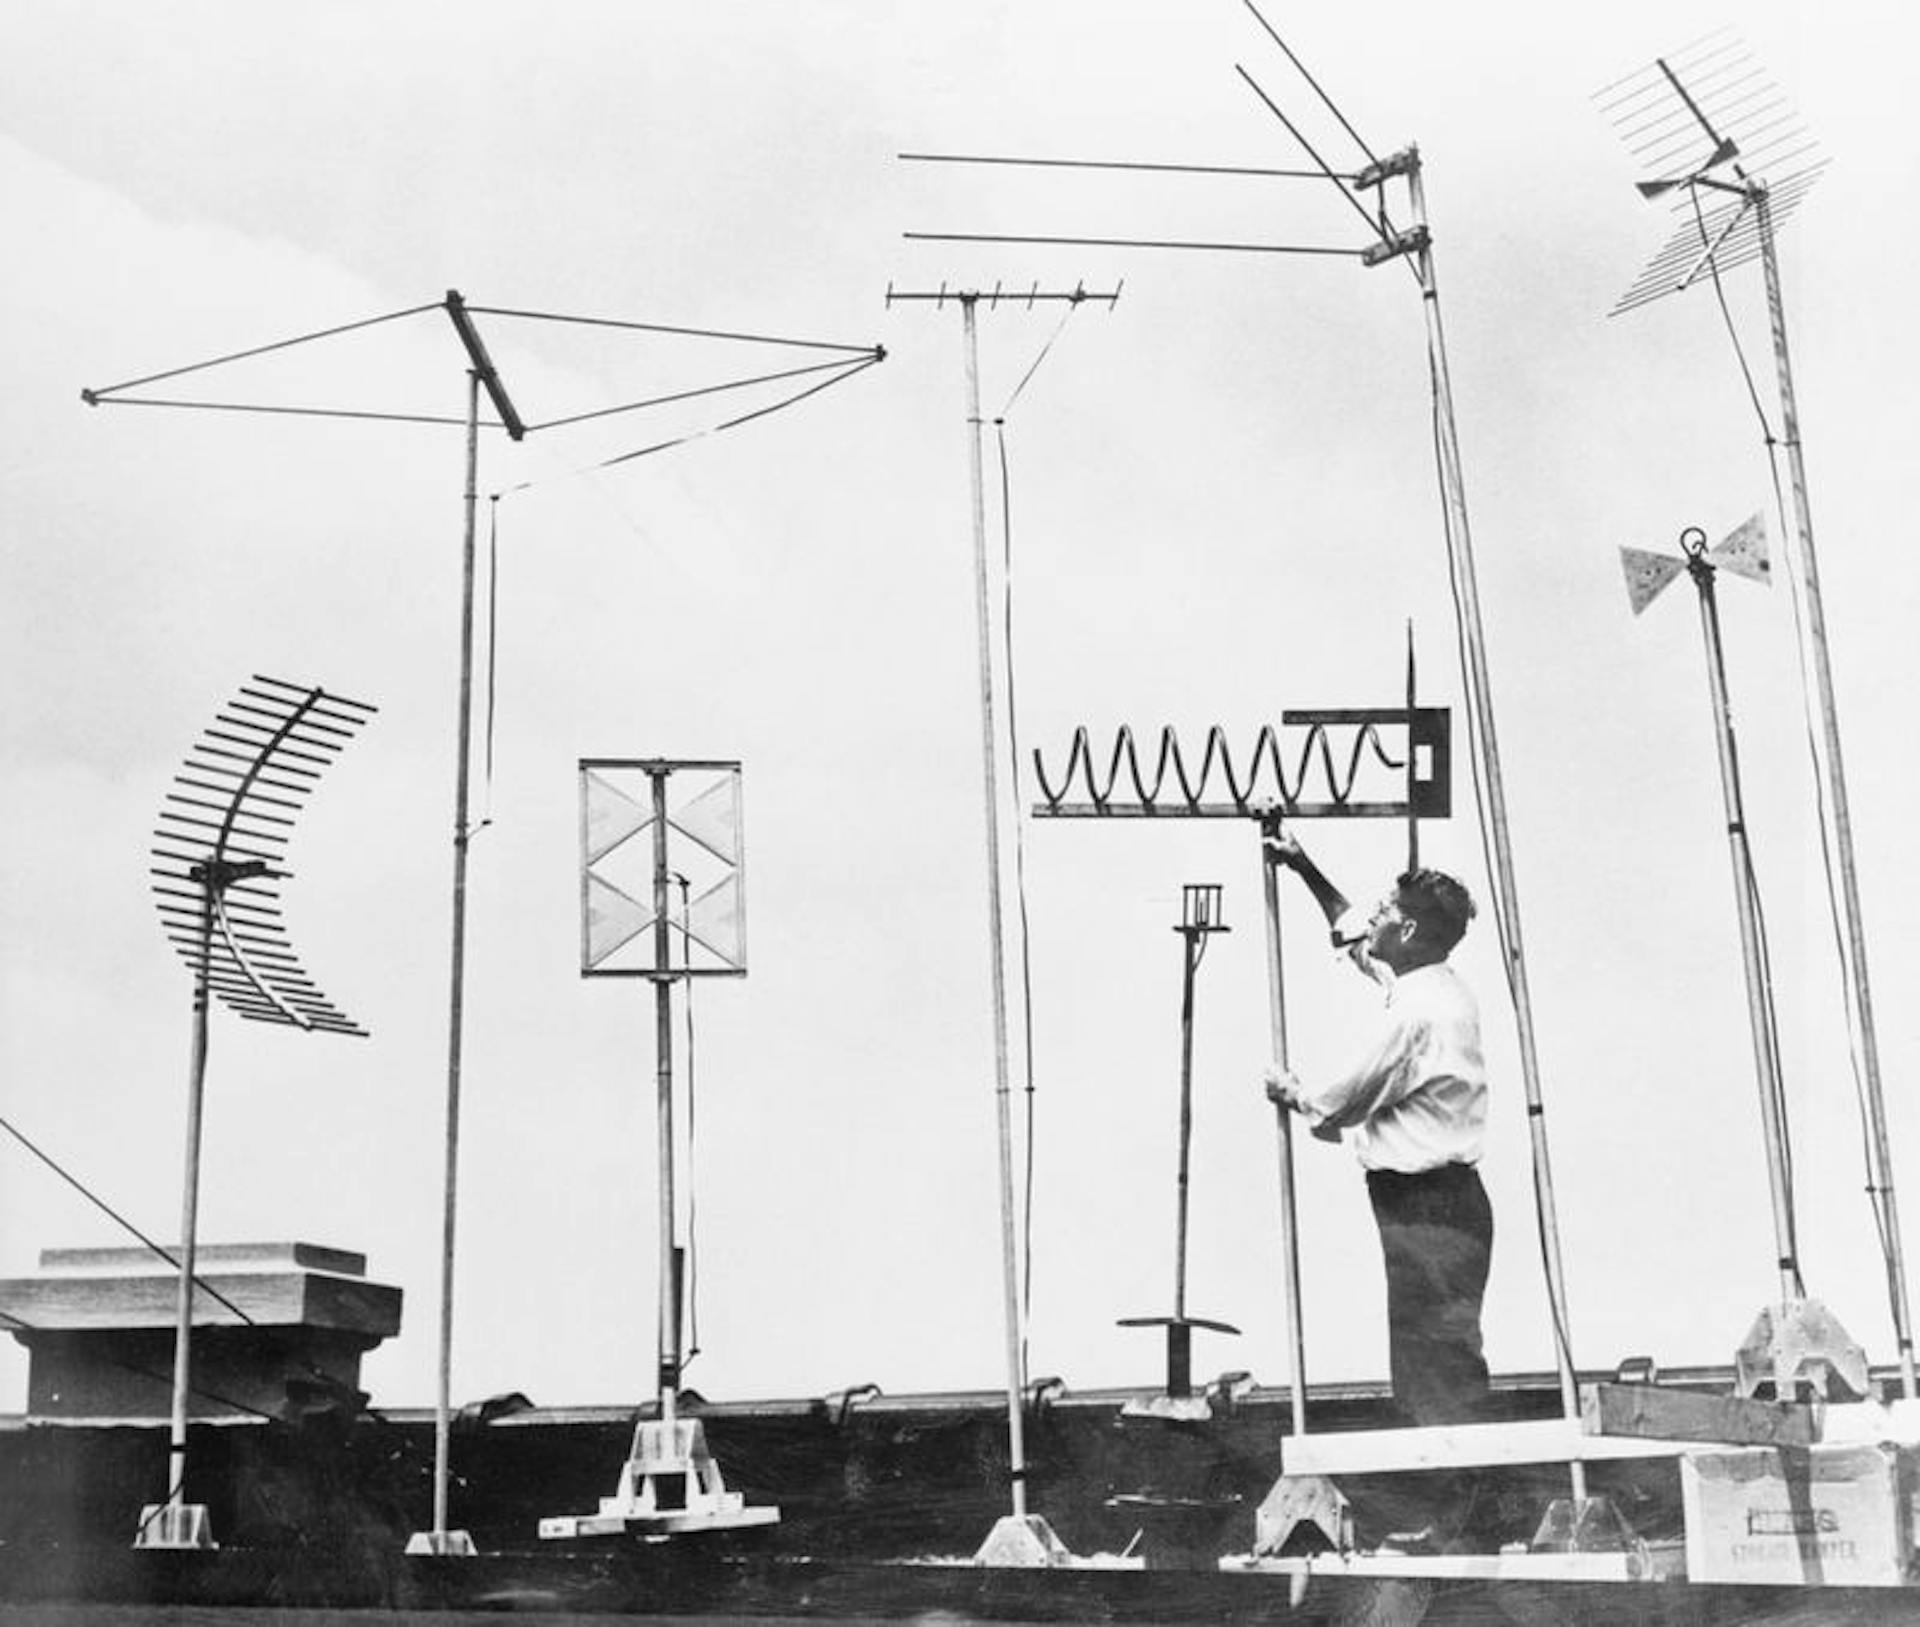 Since its founding in 1934, the Federal Communications Commission has decided which companies would have rights to which parts of the airwaves — for television and countless other technologies. Here, an RCA engineer examines an array of ultrahigh-frequency TV antennas in 1952. Credit: Bettmann Archive/Getty Images